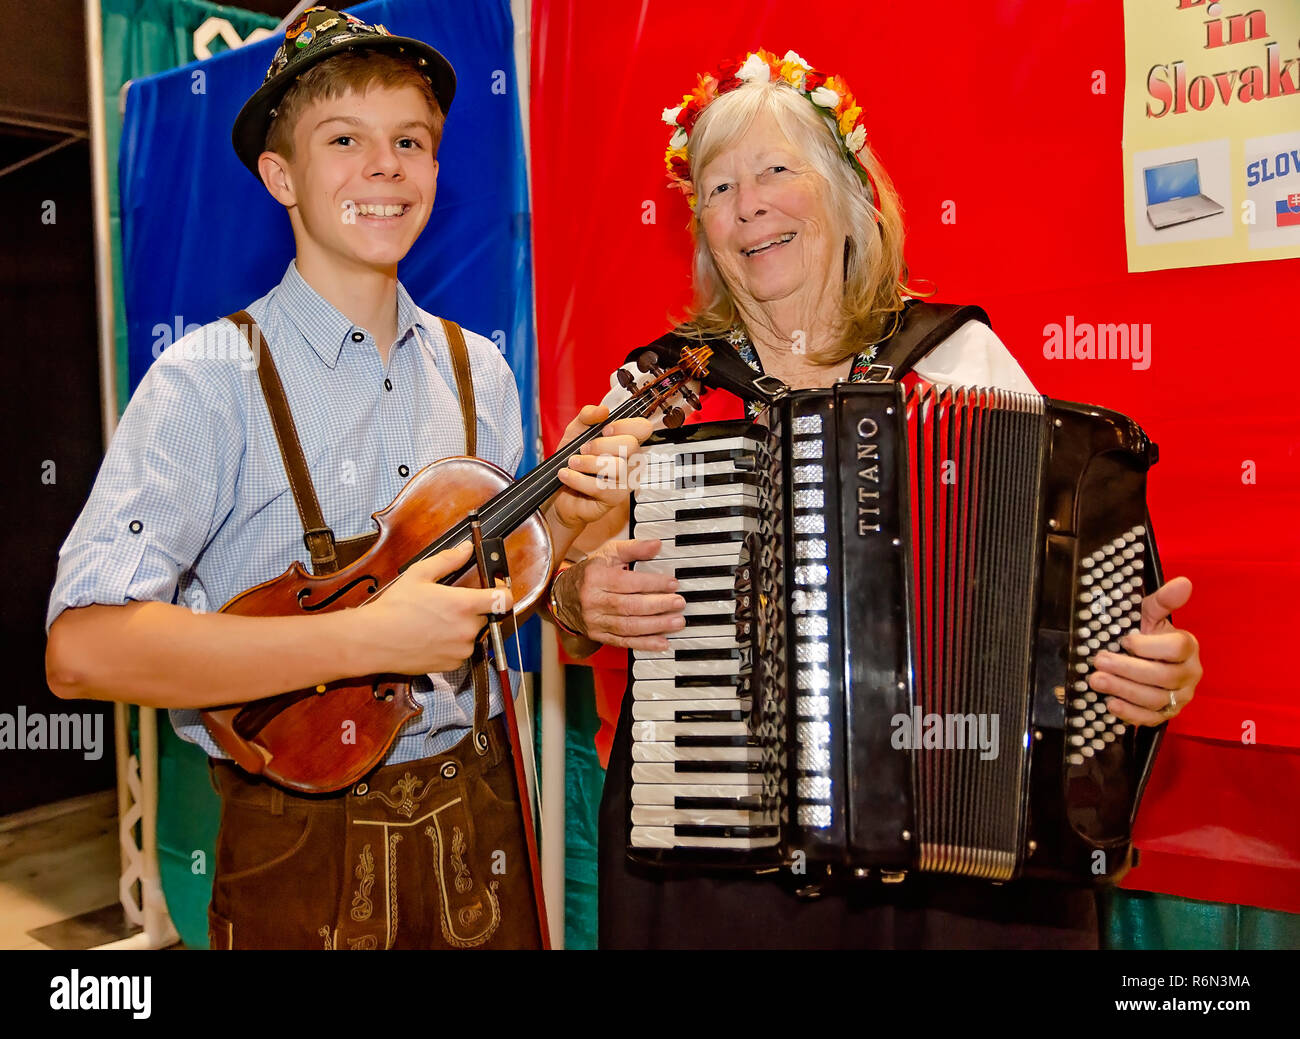 A violinist and accordionist pose for a photo at the 34th annual Mobile International Festival, Nov. 17, 2018, in Mobile, Alabama. Stock Photo